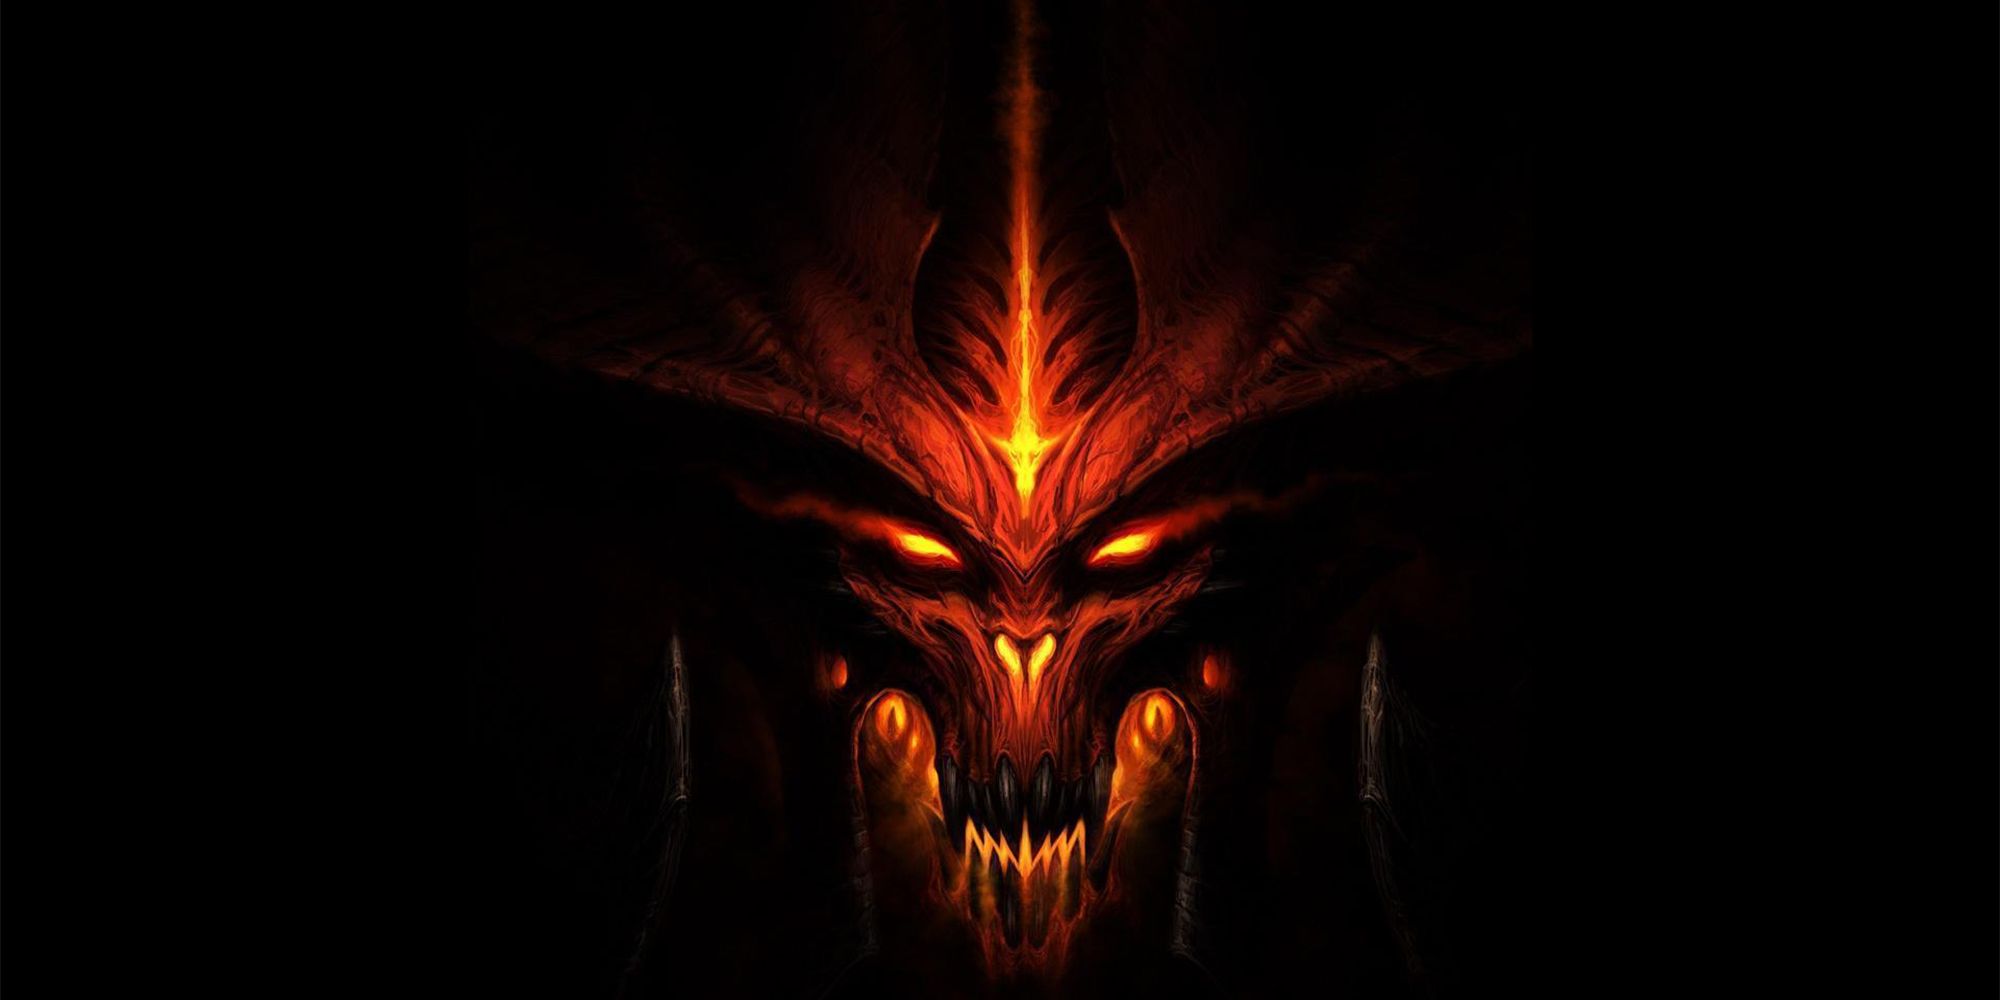 Blizzard's Fighting For Diablo Trademark Over an Animated Dog